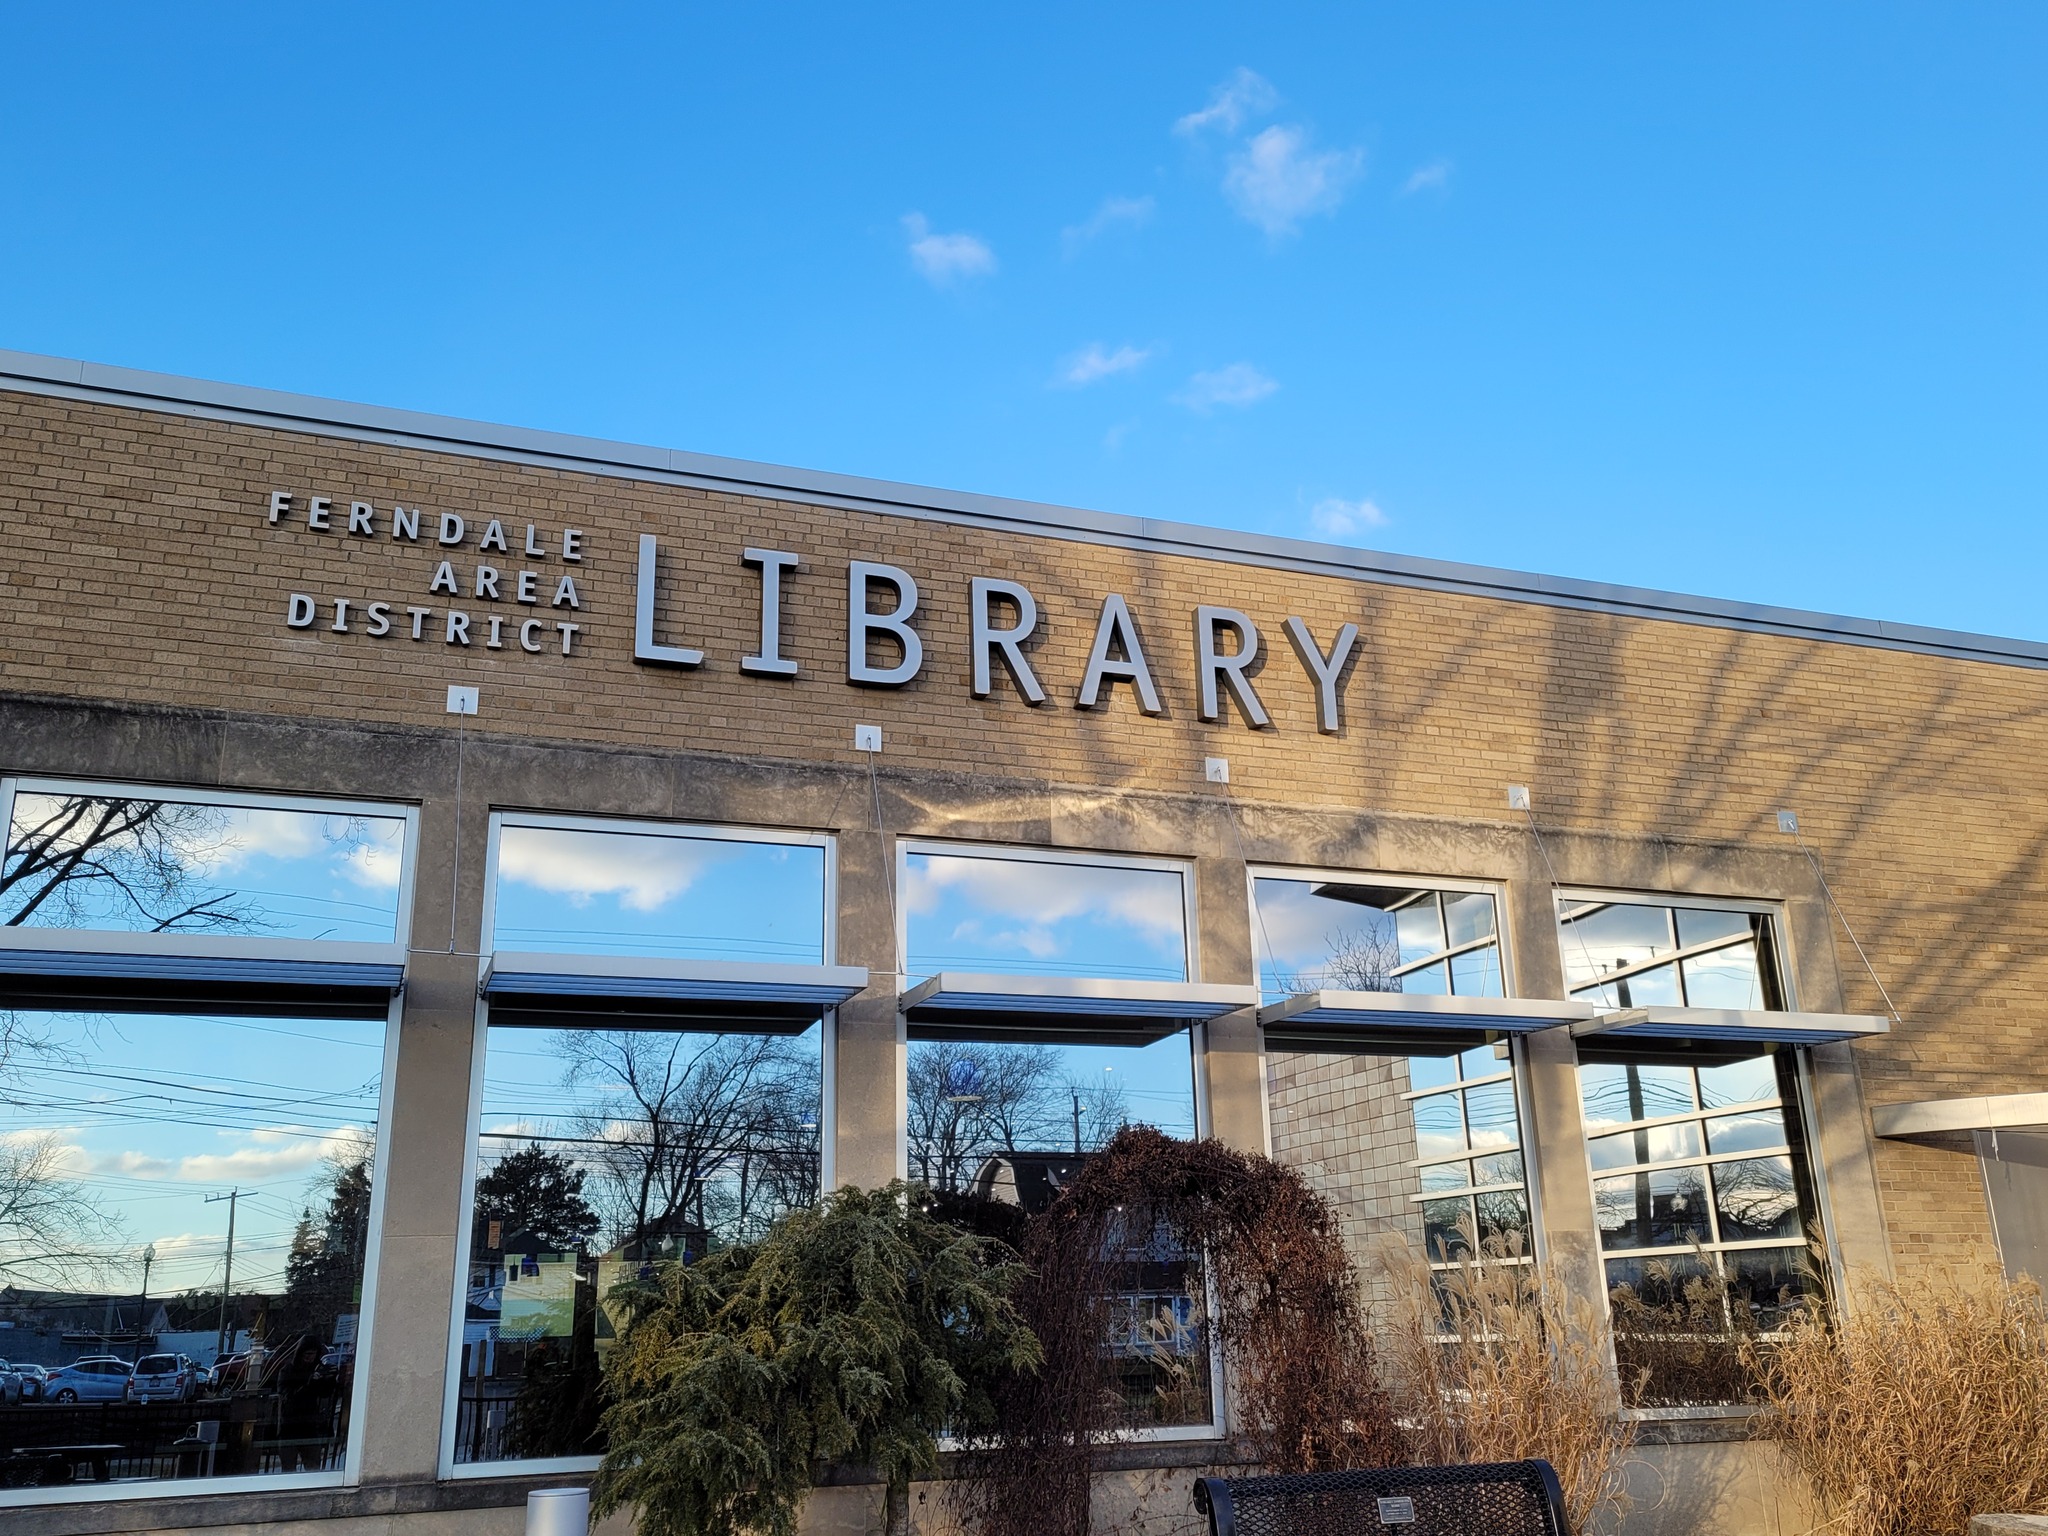 Juneteenth - Library Closed